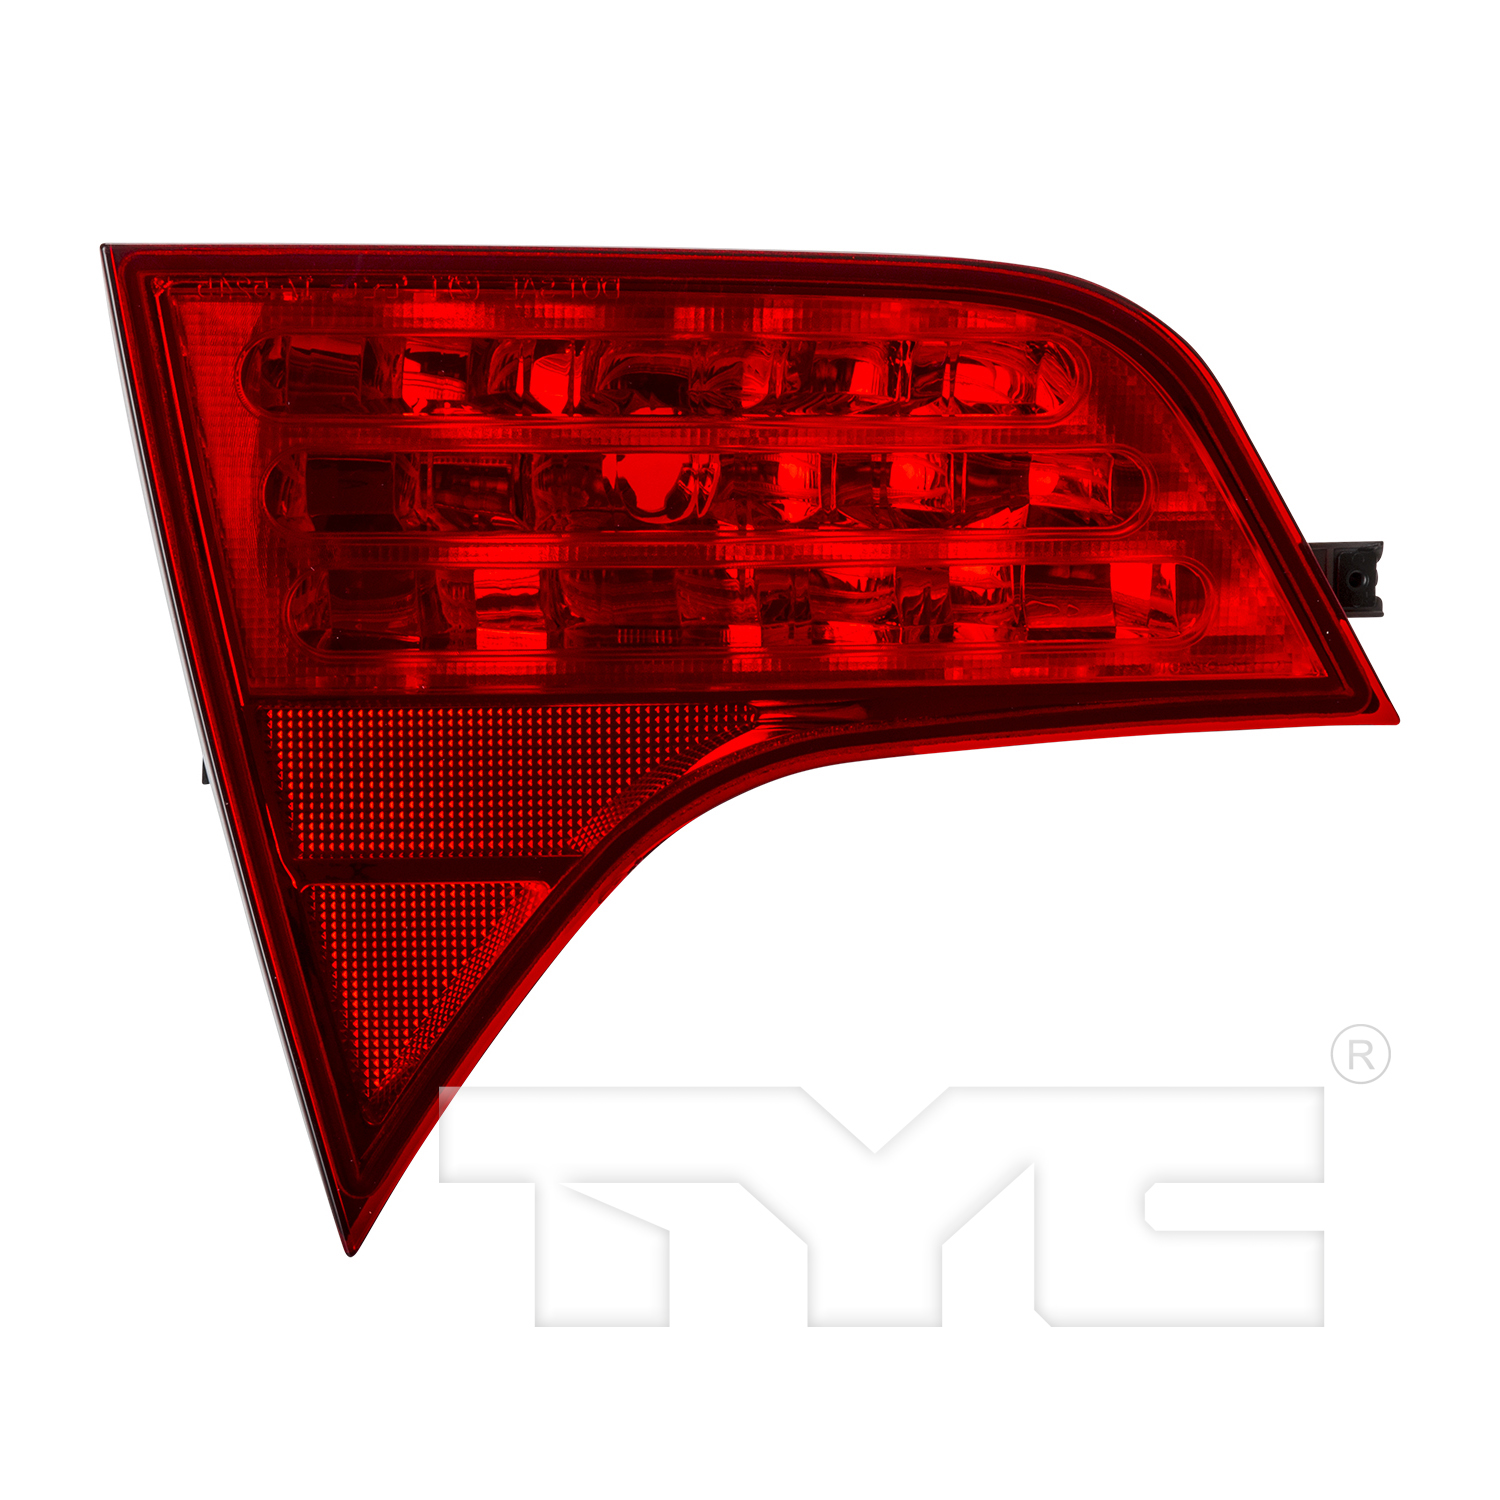 Aftermarket TAILLIGHTS for HONDA - CIVIC, CIVIC,06-11,LT Taillamp assy